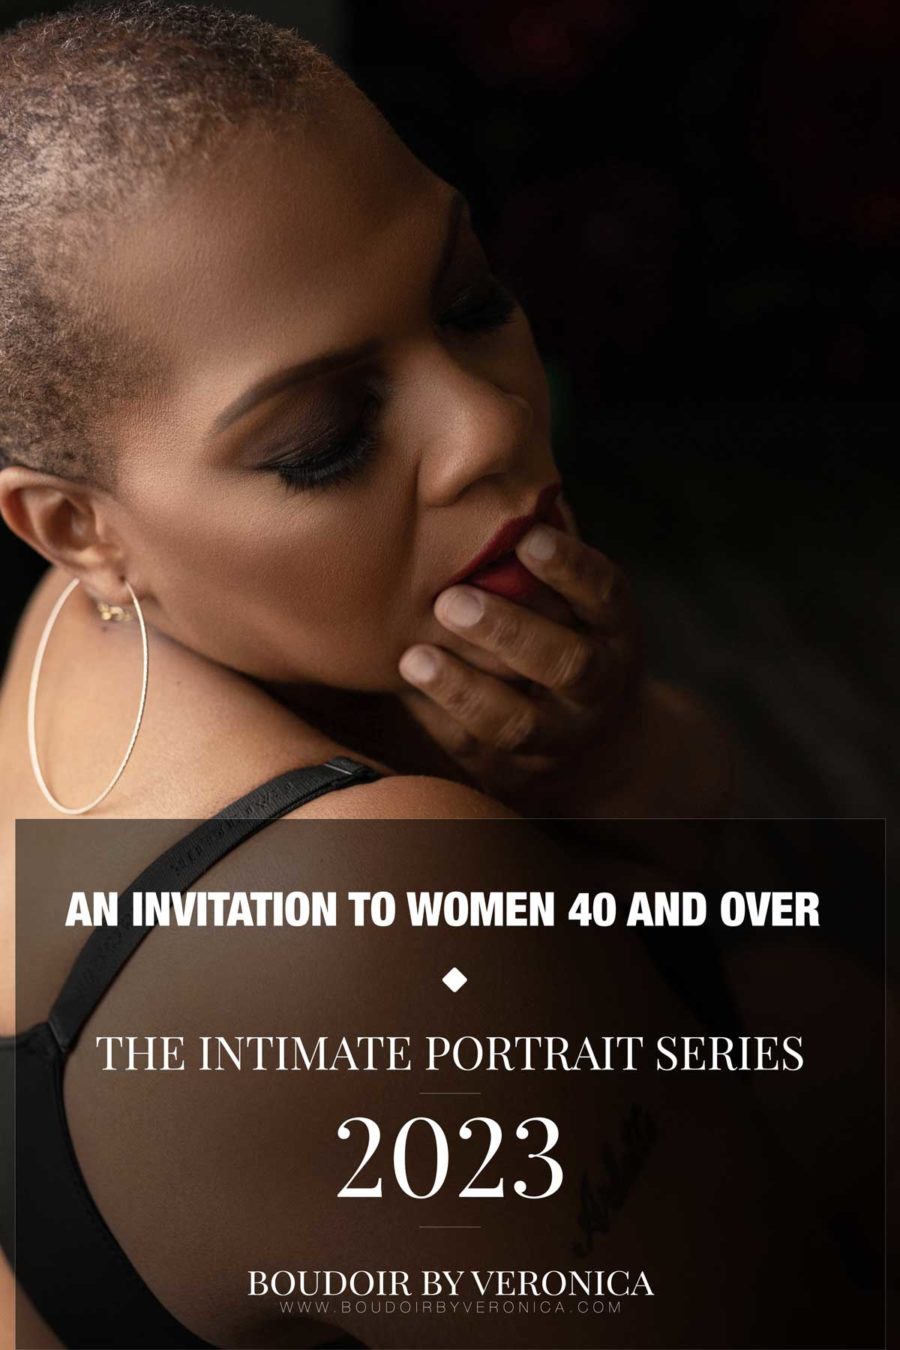 women over 40 campaign 2023 and invitation for a boudoir shoot and intimate portrait session